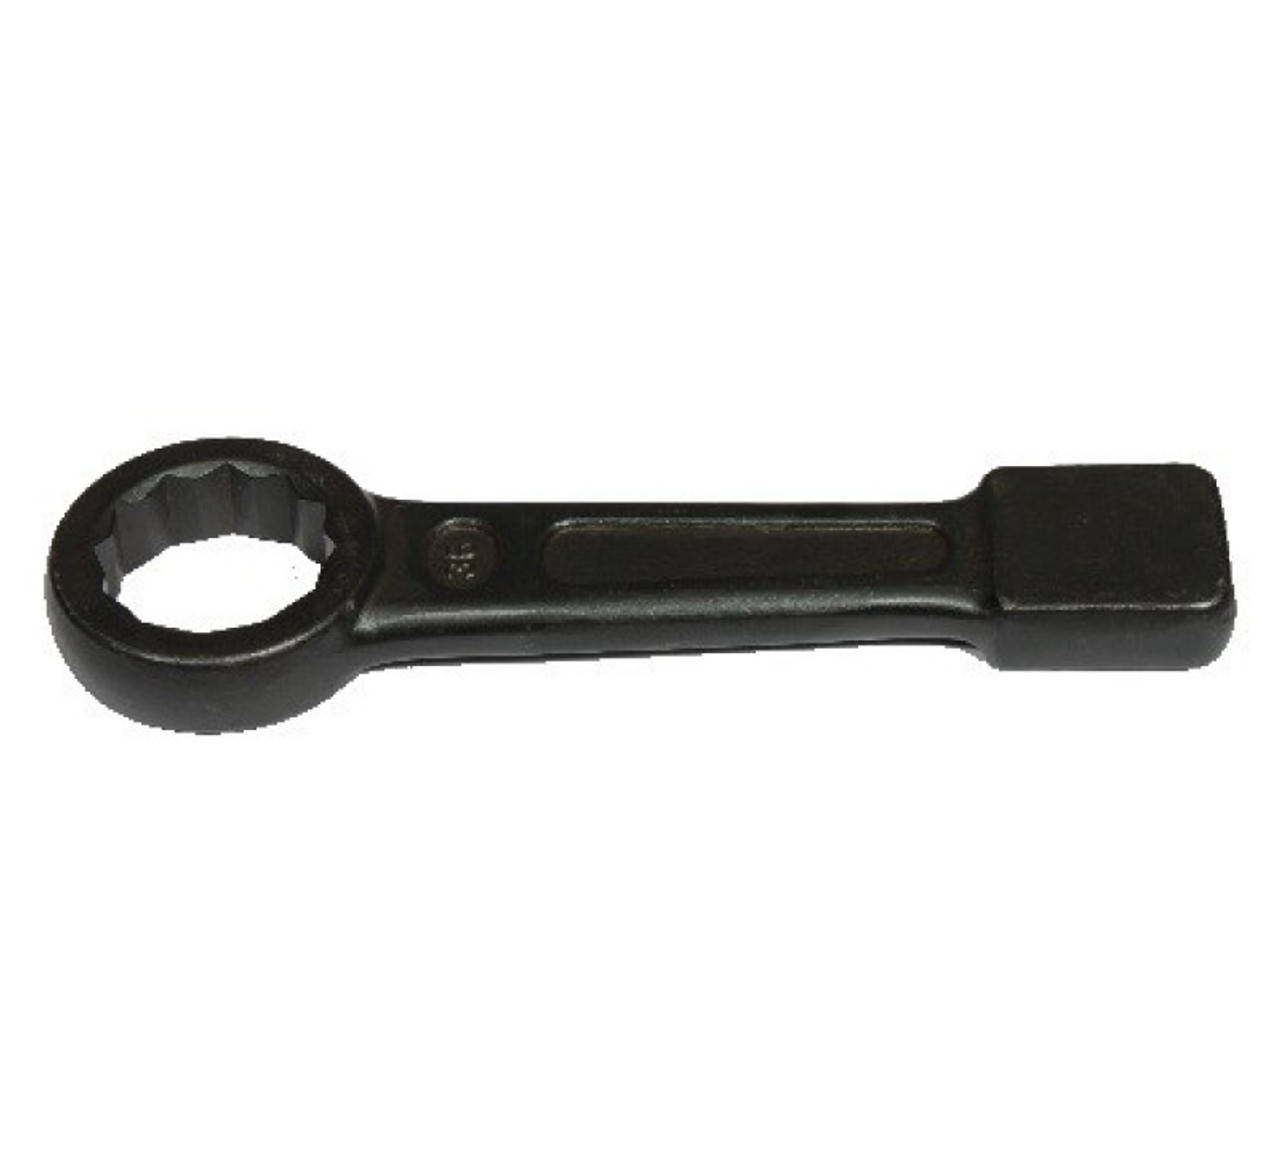 IMPA 611155 Striking wrench single open end 70 mm Kukko 133-70 (deliverytime 2 days - ex works factory)